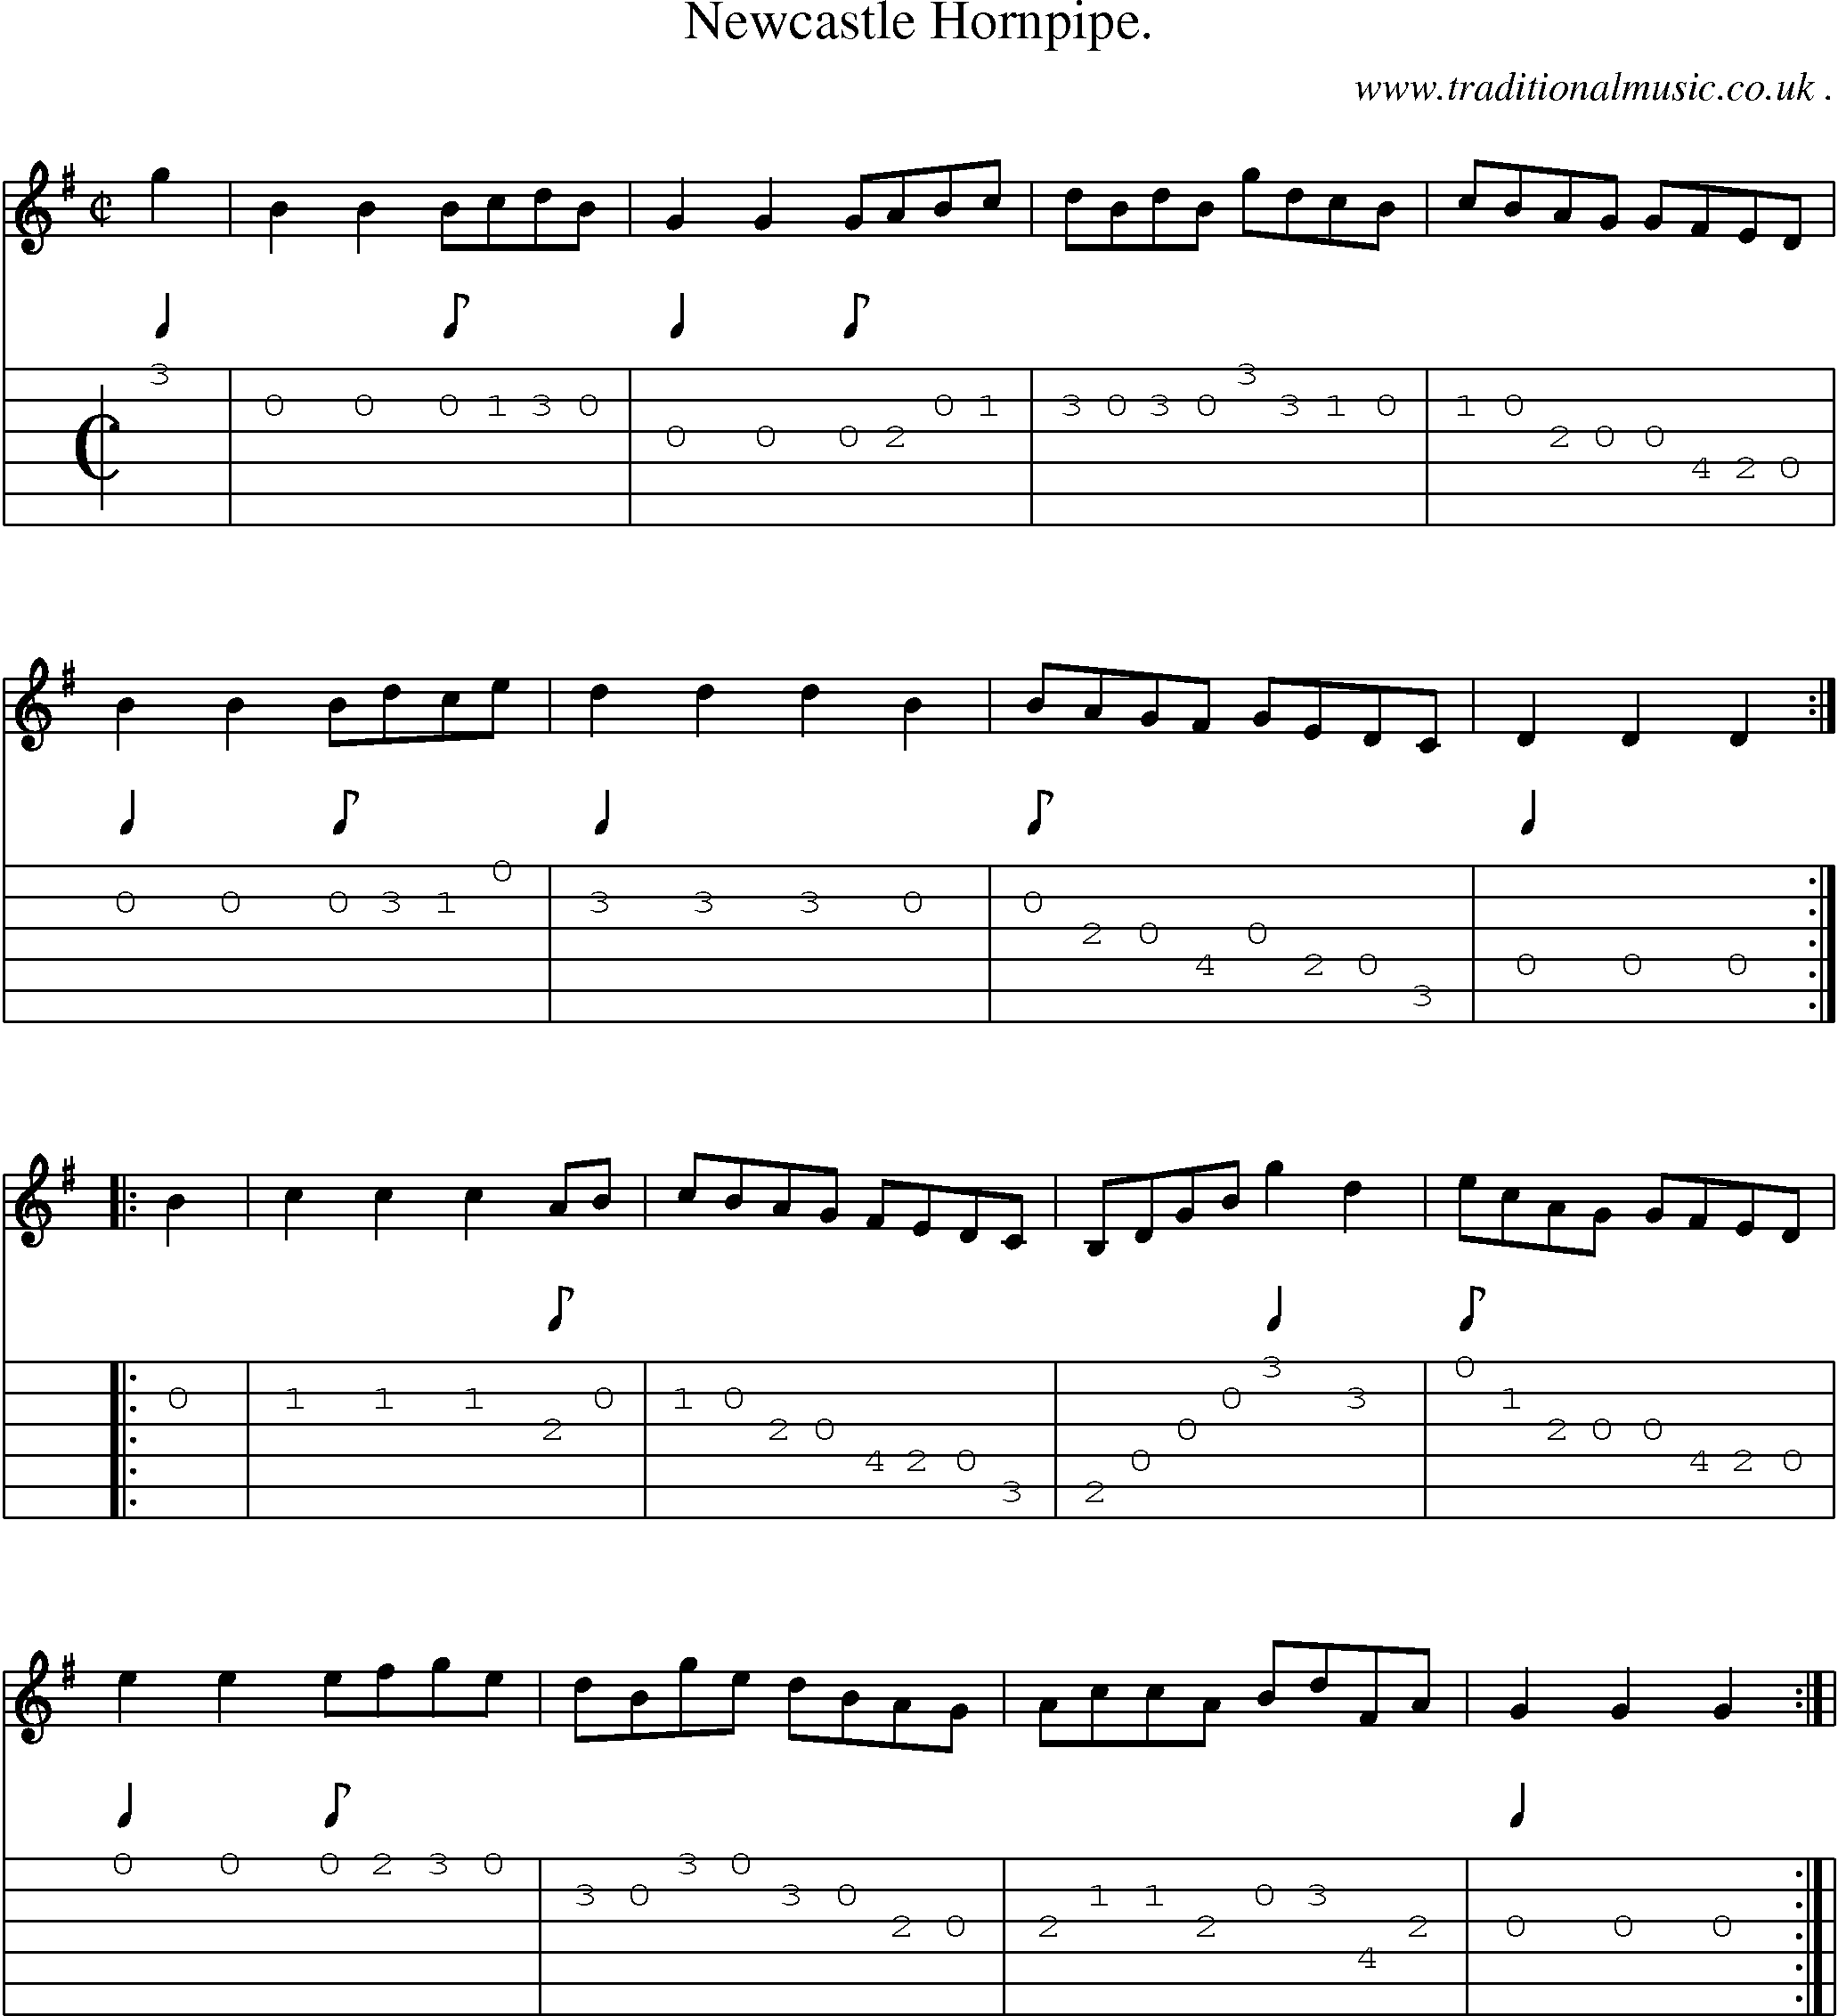 Sheet-Music and Guitar Tabs for Newcastle Hornpipe